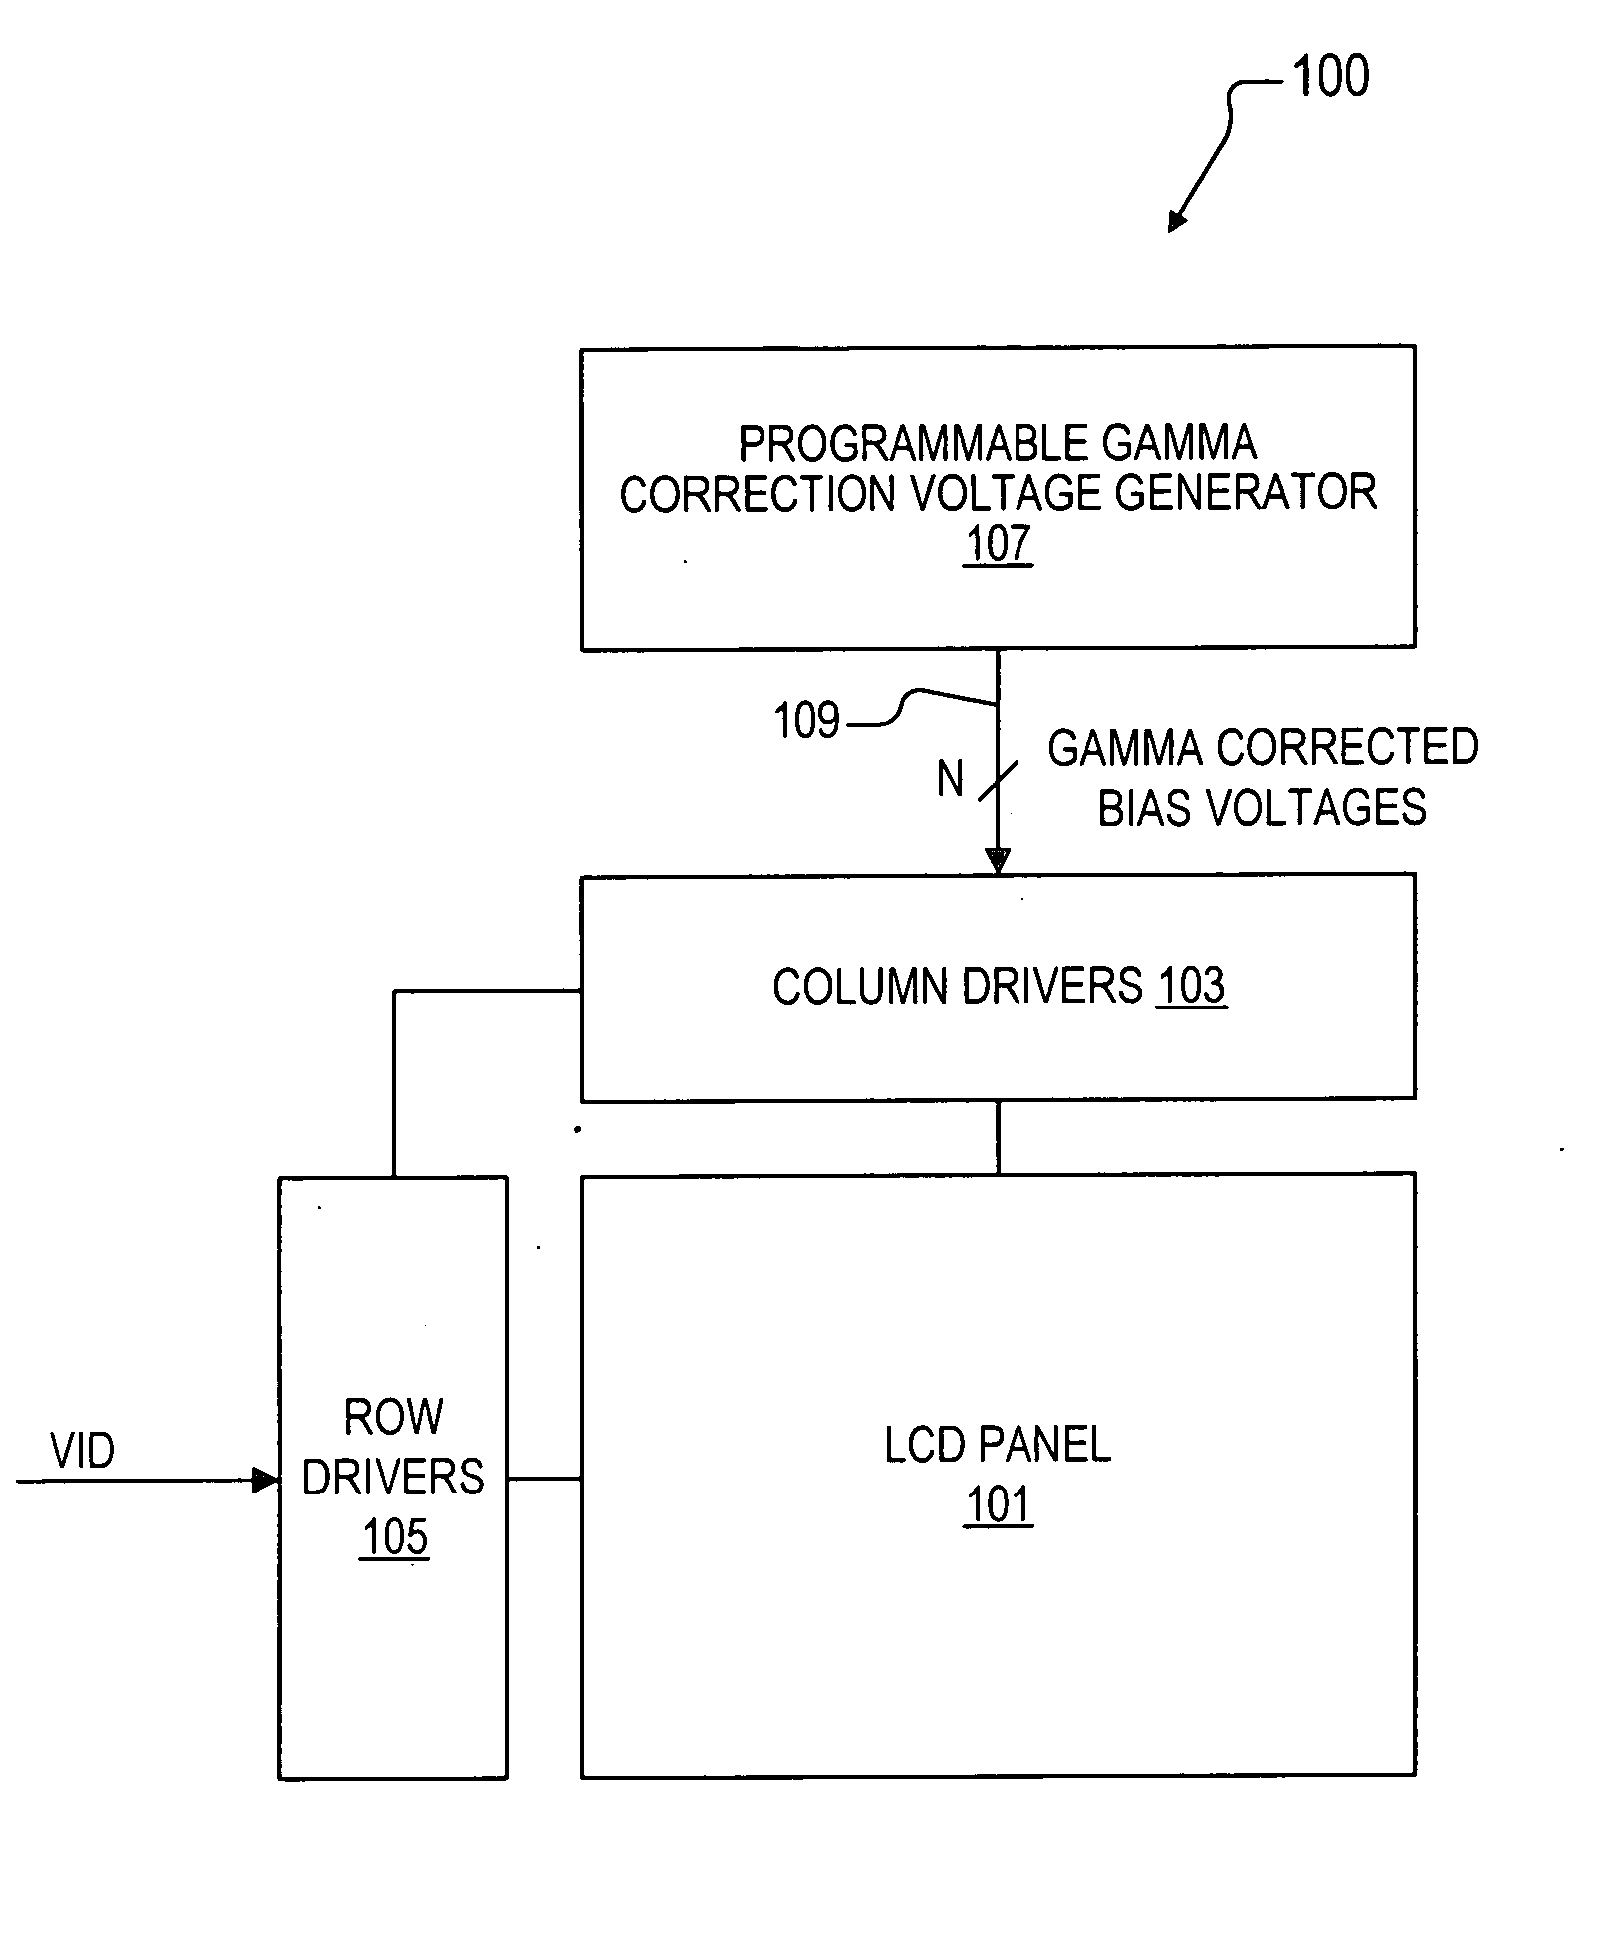 Multiple channel programmable gamma correction voltage generator